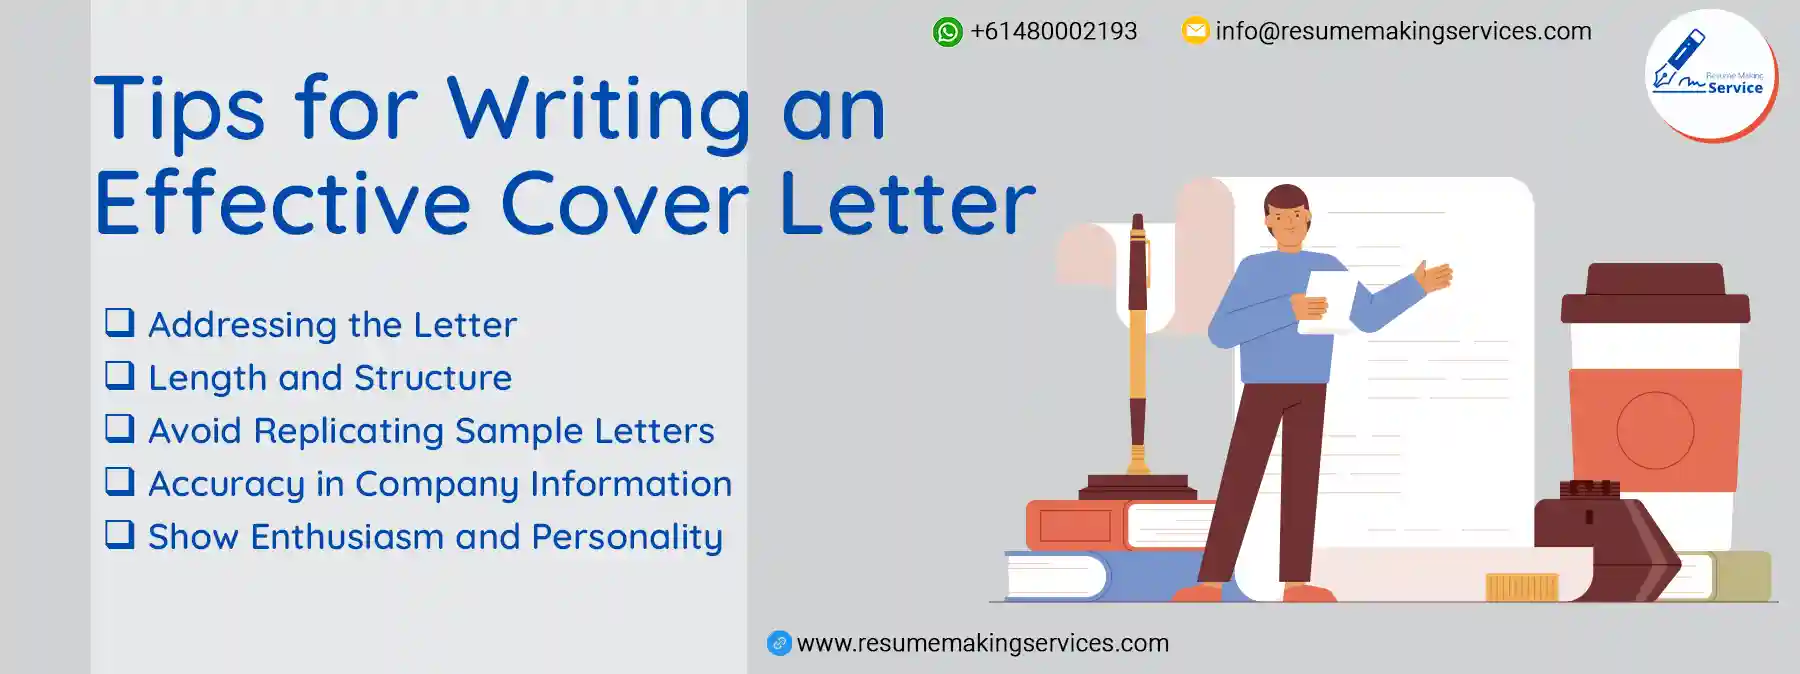 Tips for writing an effective cover letter